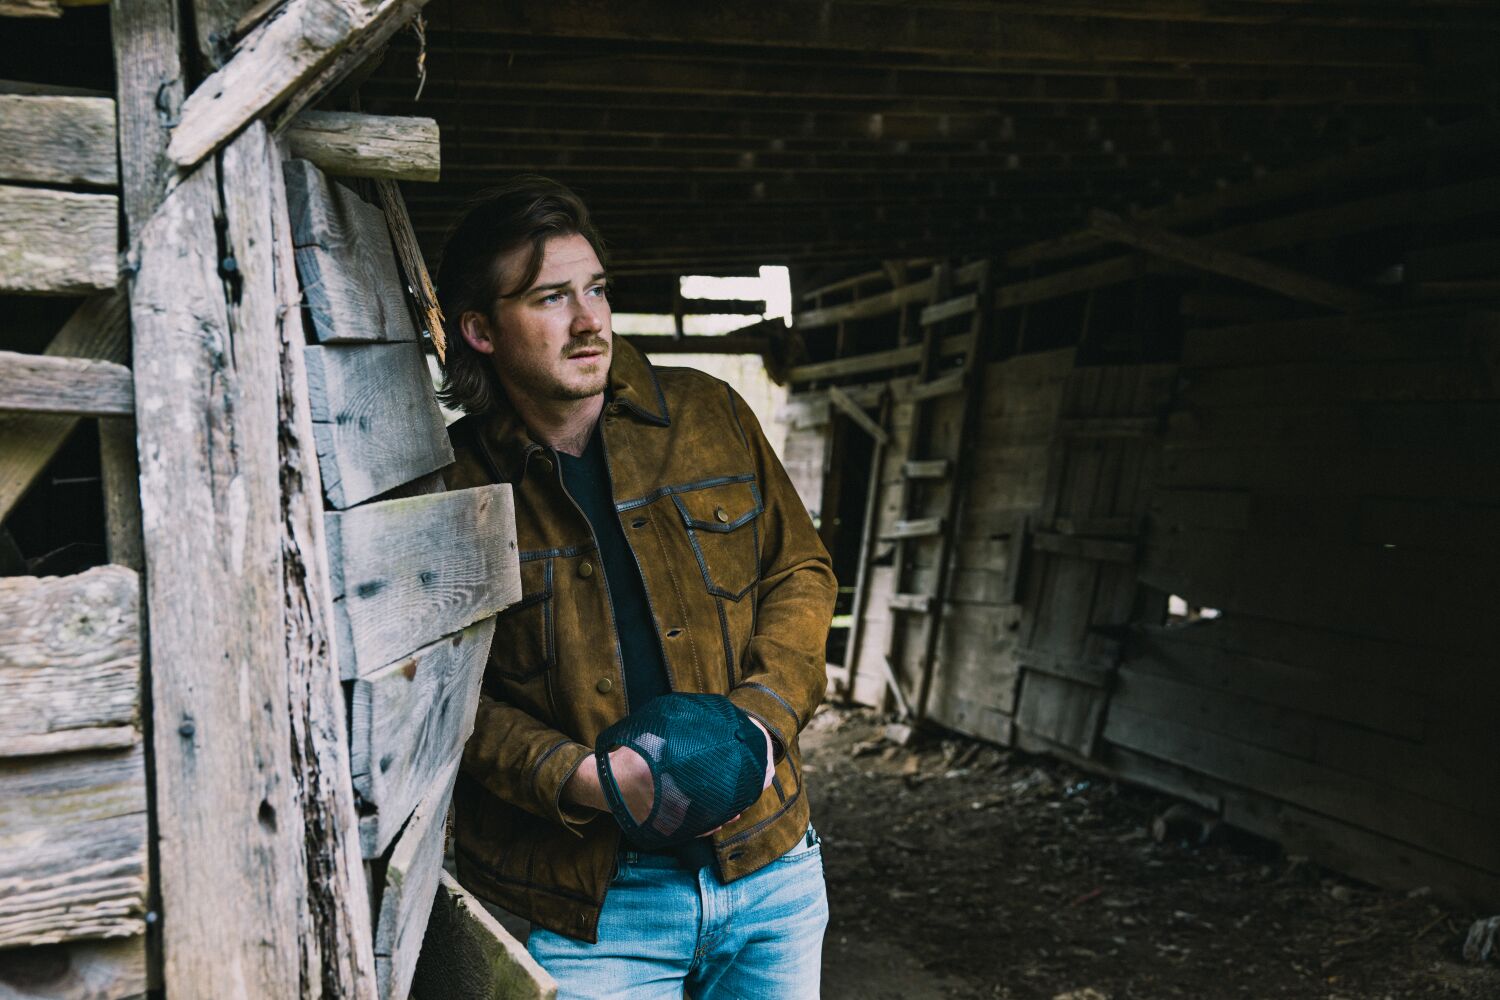 36 songs, no apologies: Morgan Wallen delivers more (much more) of what made him country's king